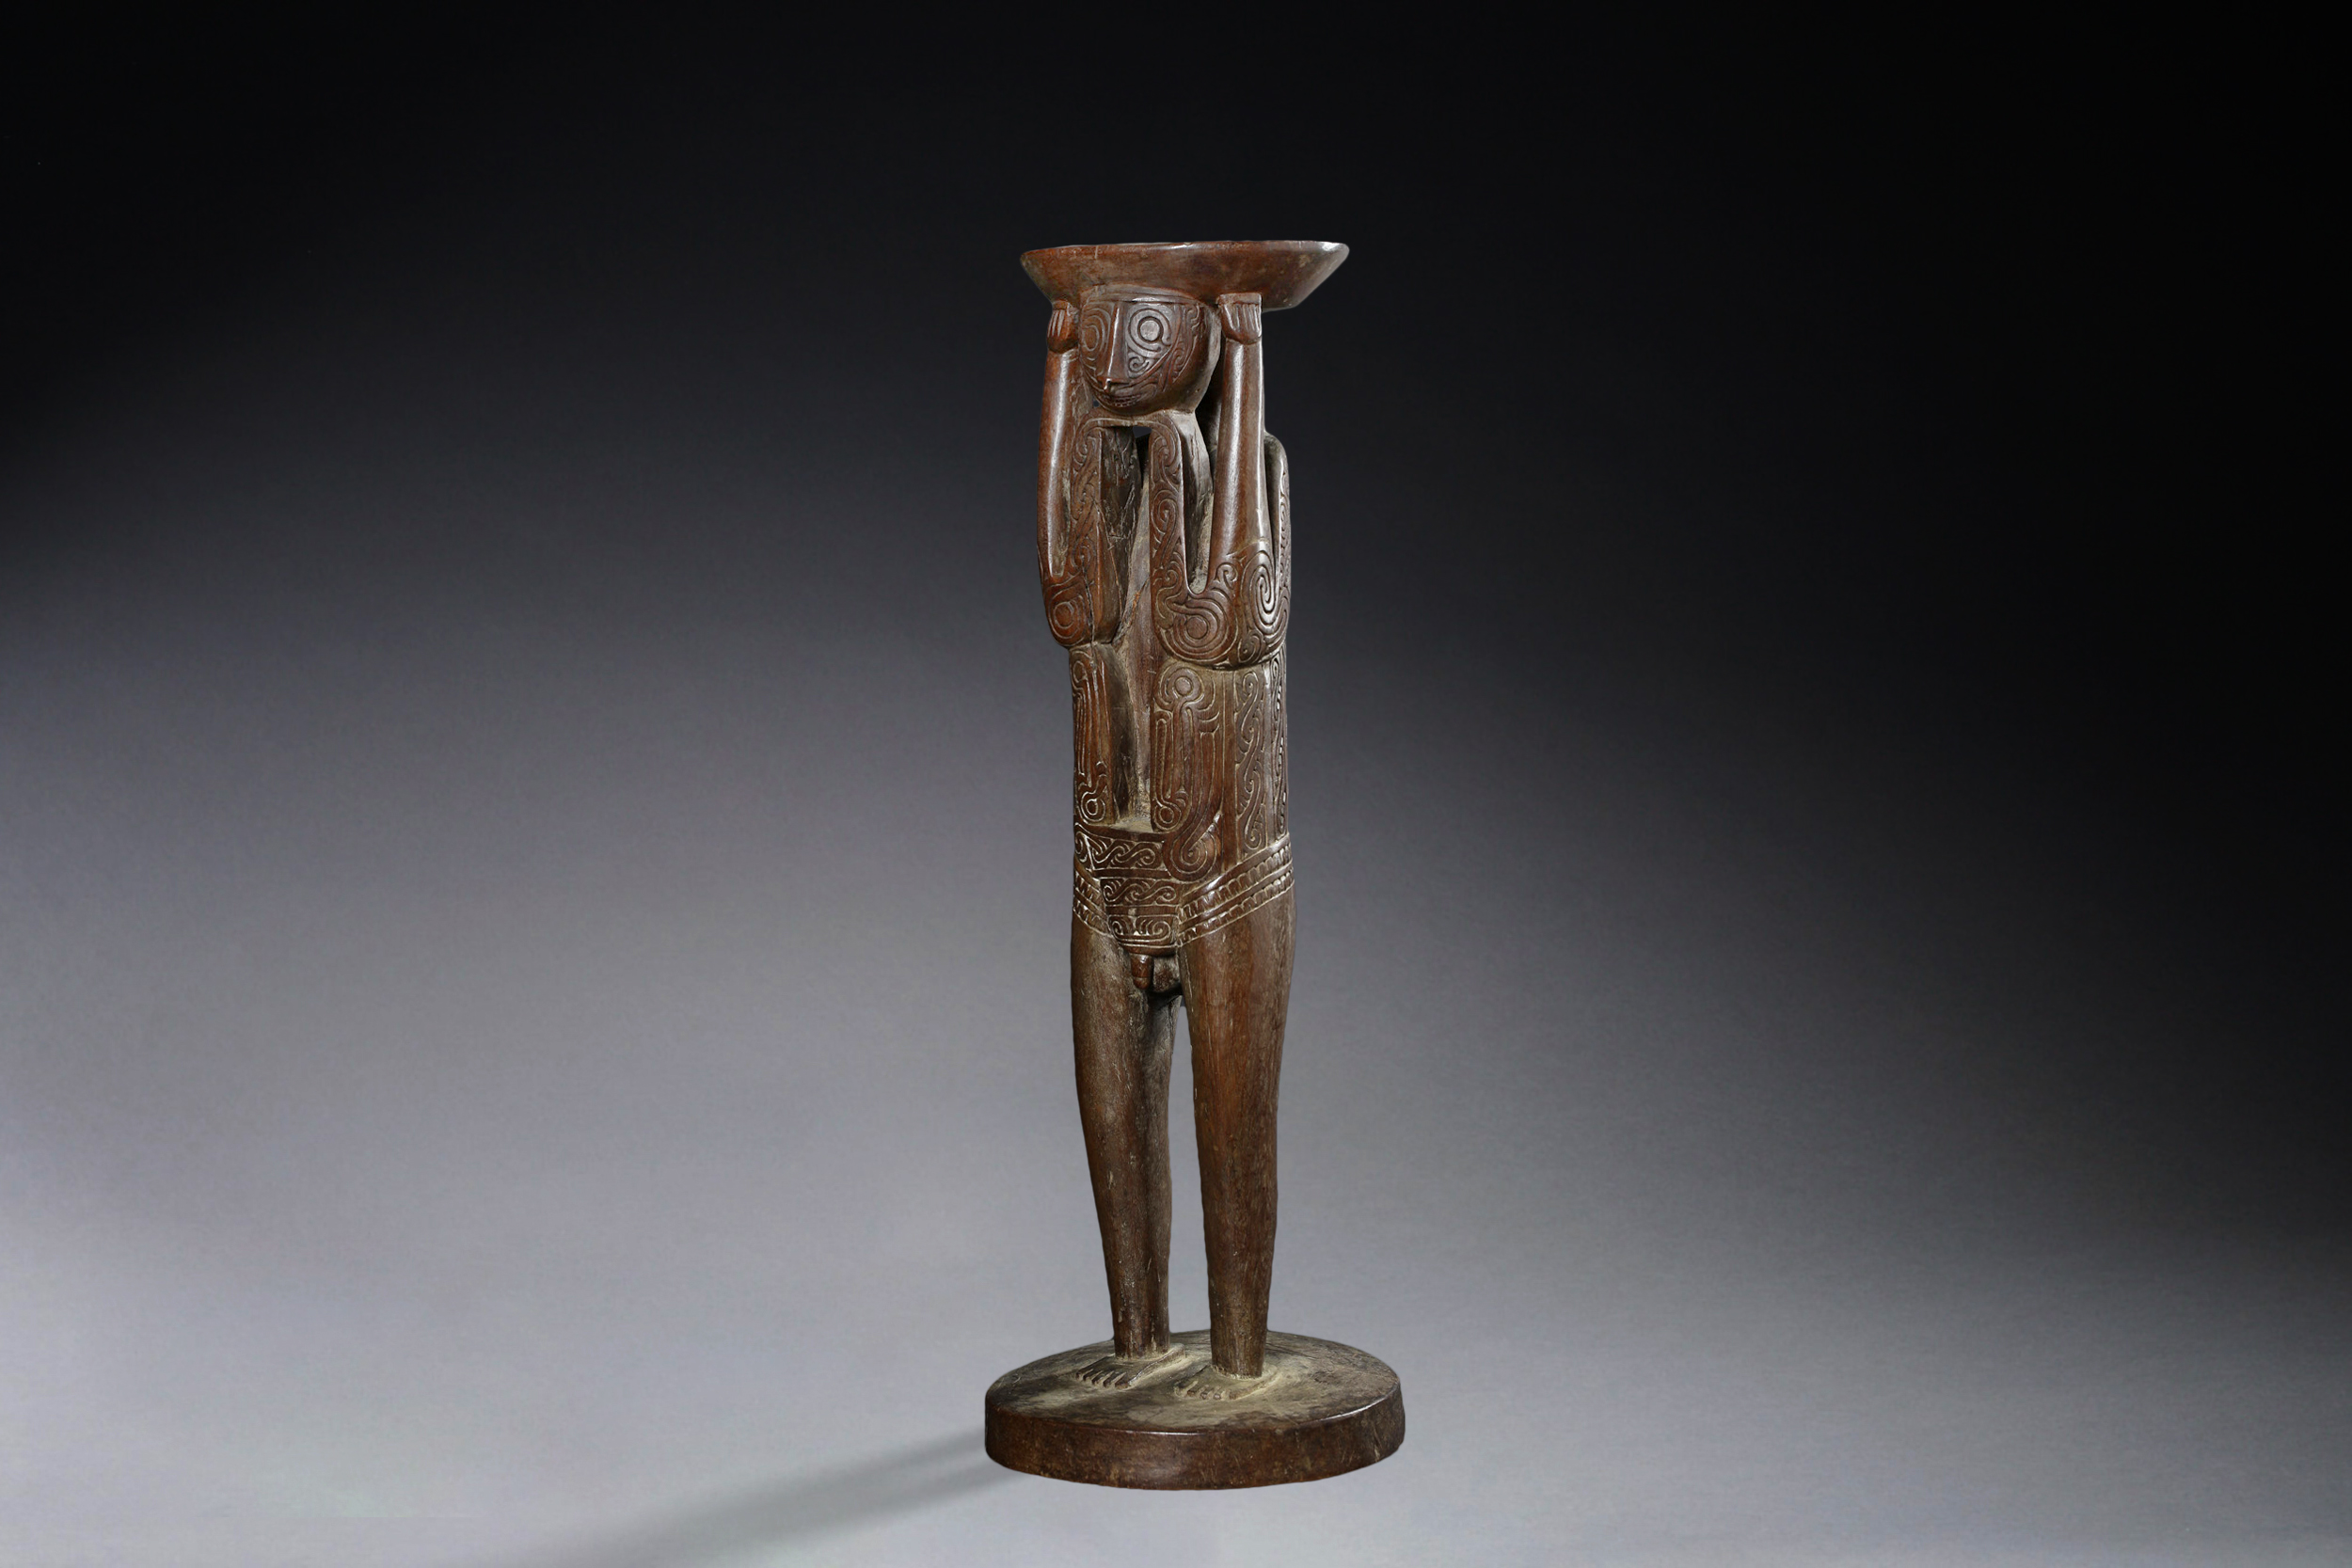 An Early Massim Figure from Milne Bay Province New Guinea